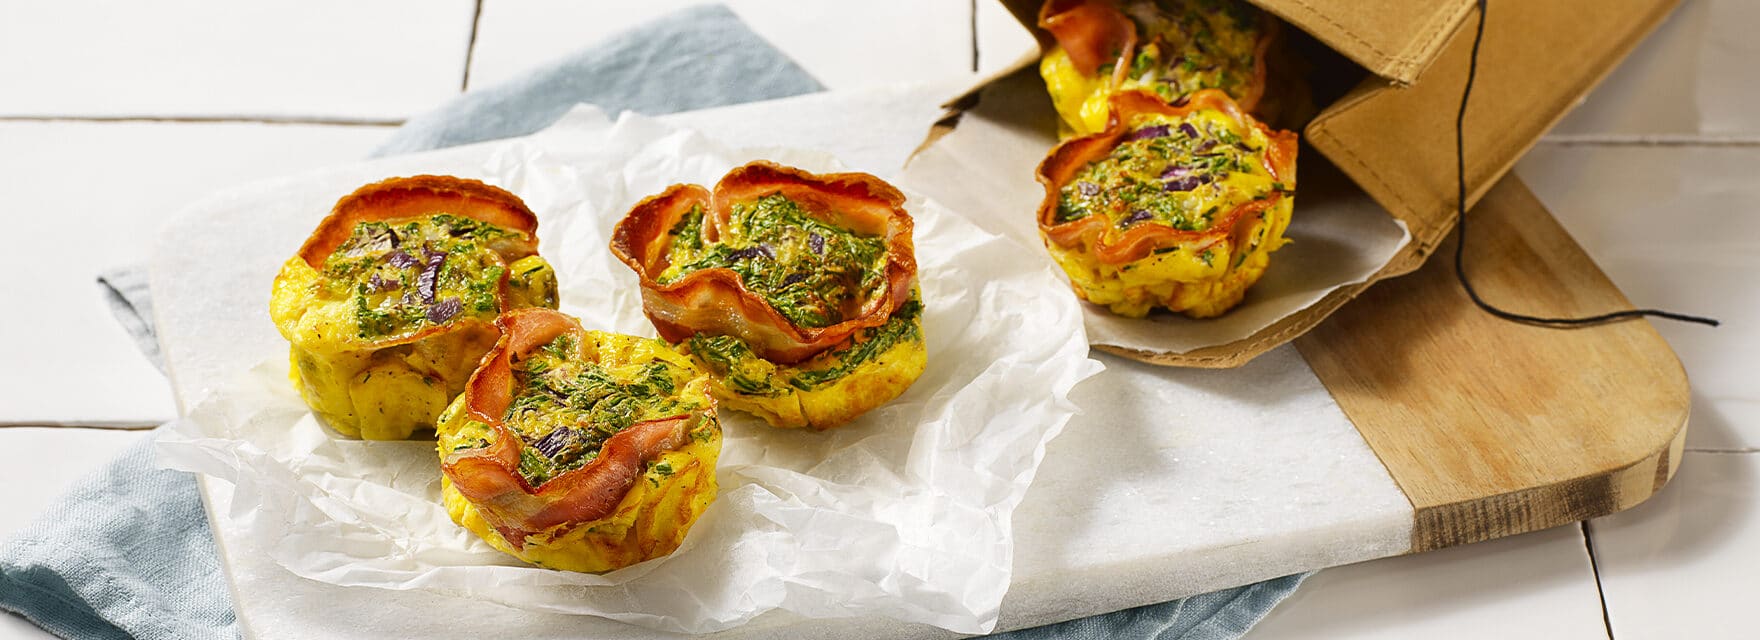 Breakfast to go: healthy and easy recipes to take with you!